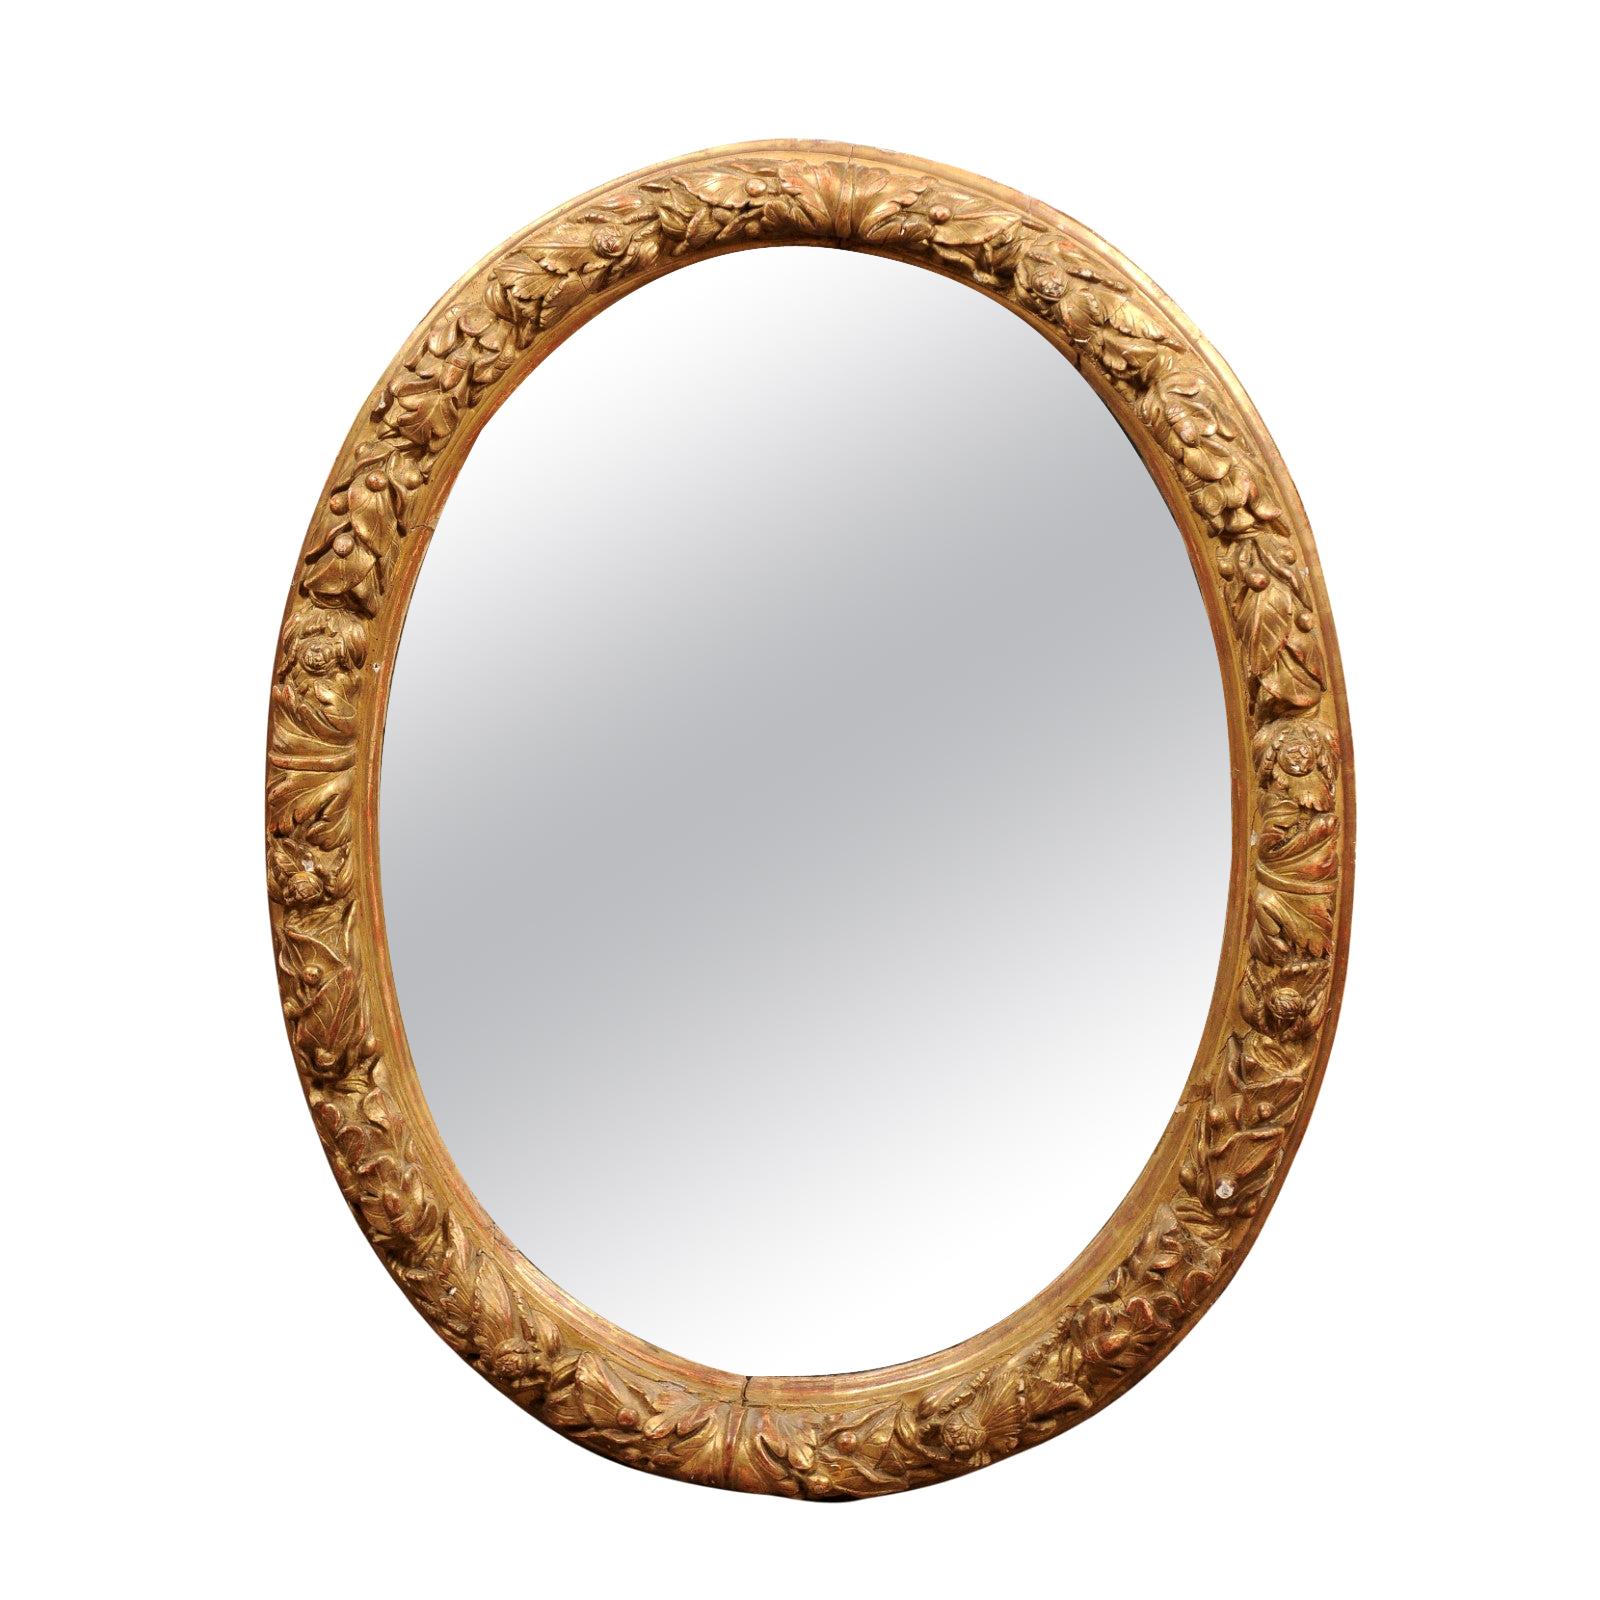 French Oval Giltwood Mirror, Early 18th Century